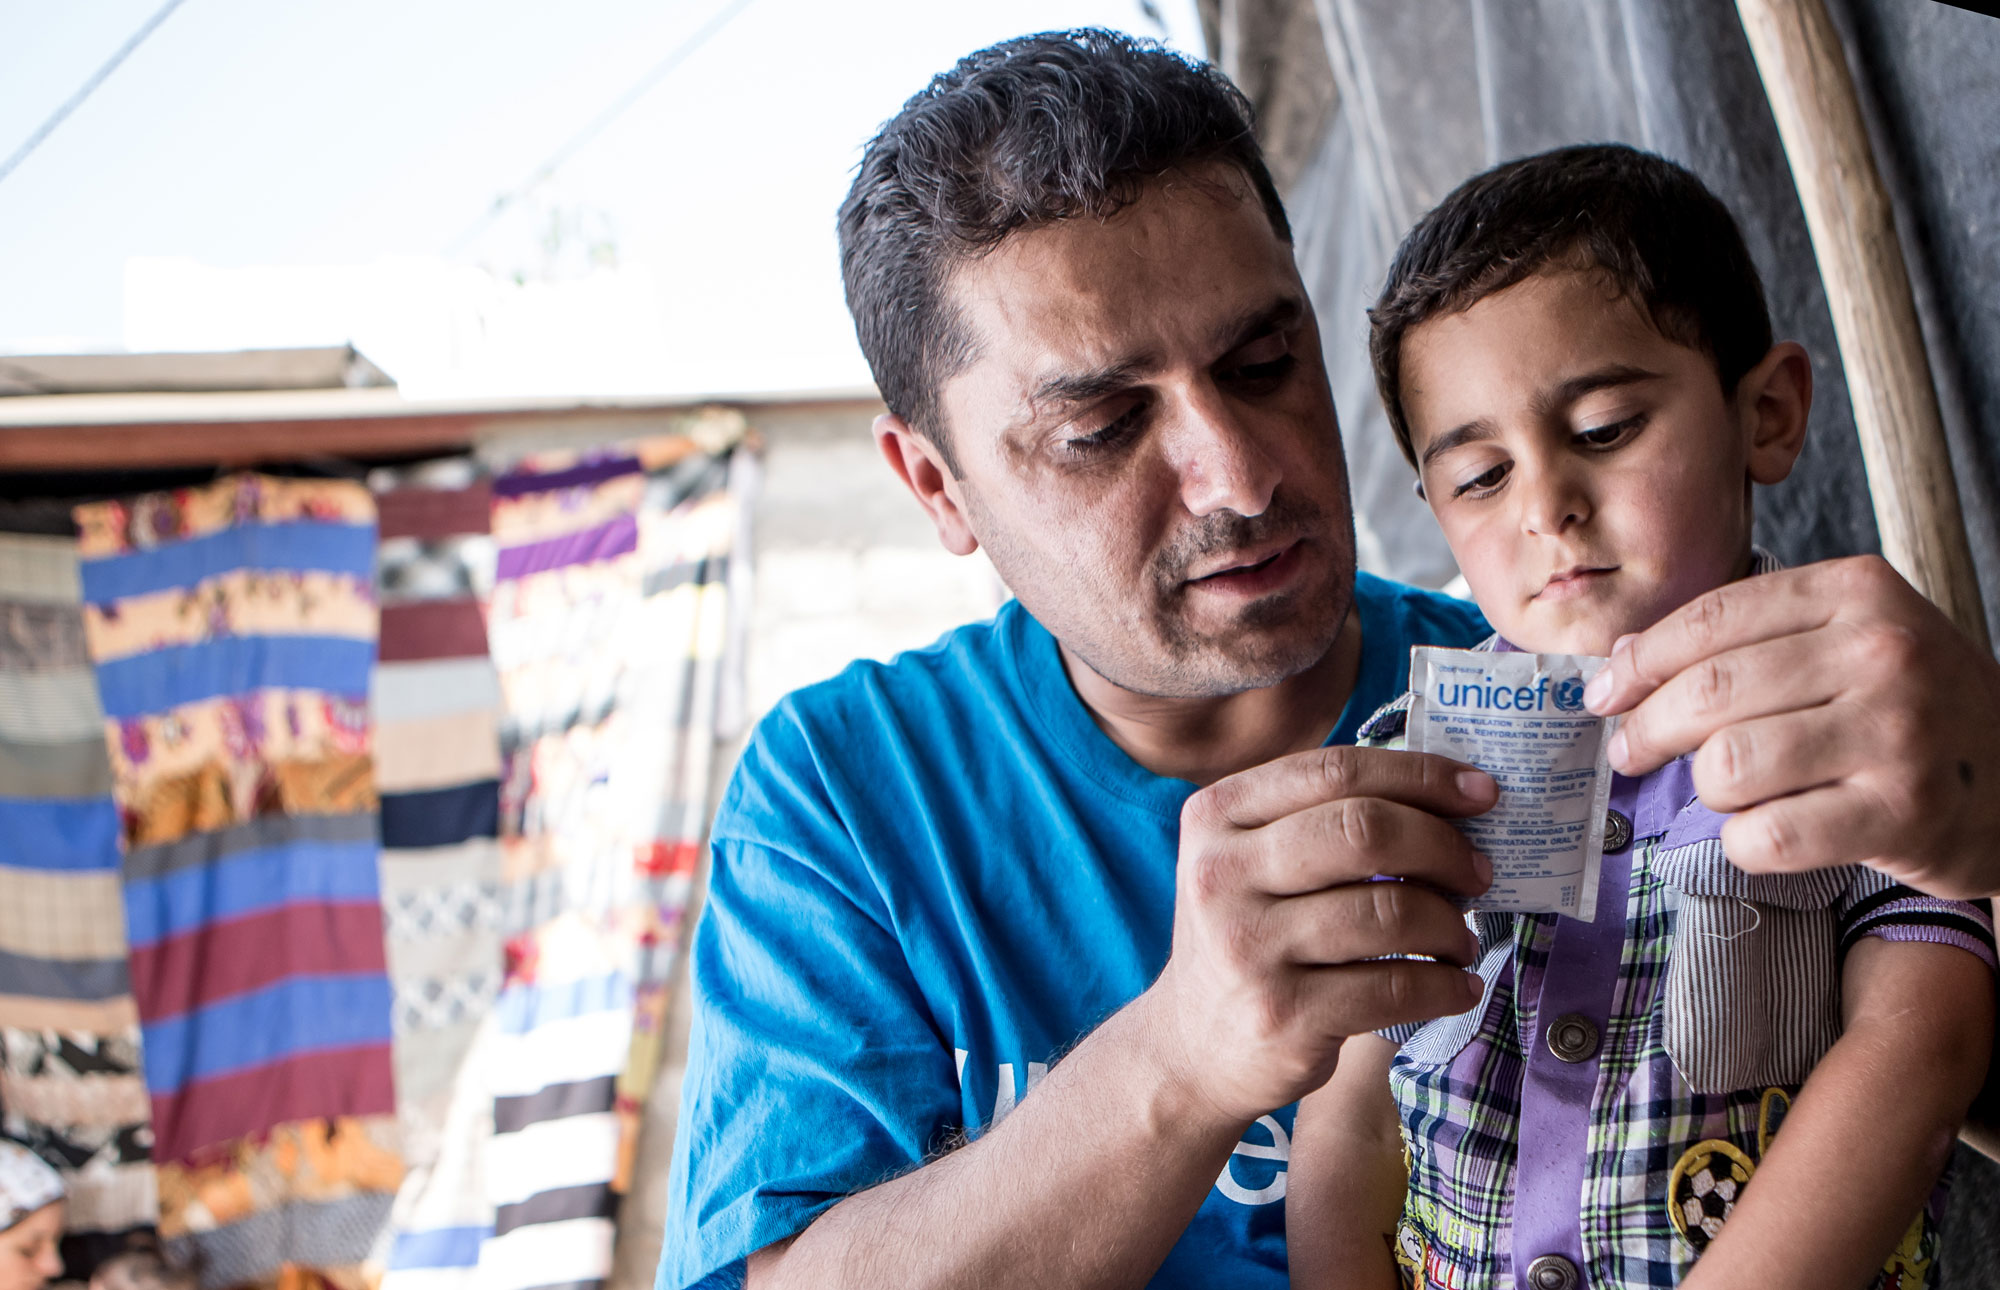 Iraq, May 2013. UNICEF worker Abduljabar prepares oral rehydration salts for four year old Ahmed. Ahmed lives with his brother and parents in a small room amongst five other families in the Domiz refugee camp in Northern Iraq. Domiz is situated near the city of Dohuk, about forty miles from the Syrian border. Approximately 40,000 Syrians are living here, in facilities provided for around half that number. Unicef 2013 Schermbrucker